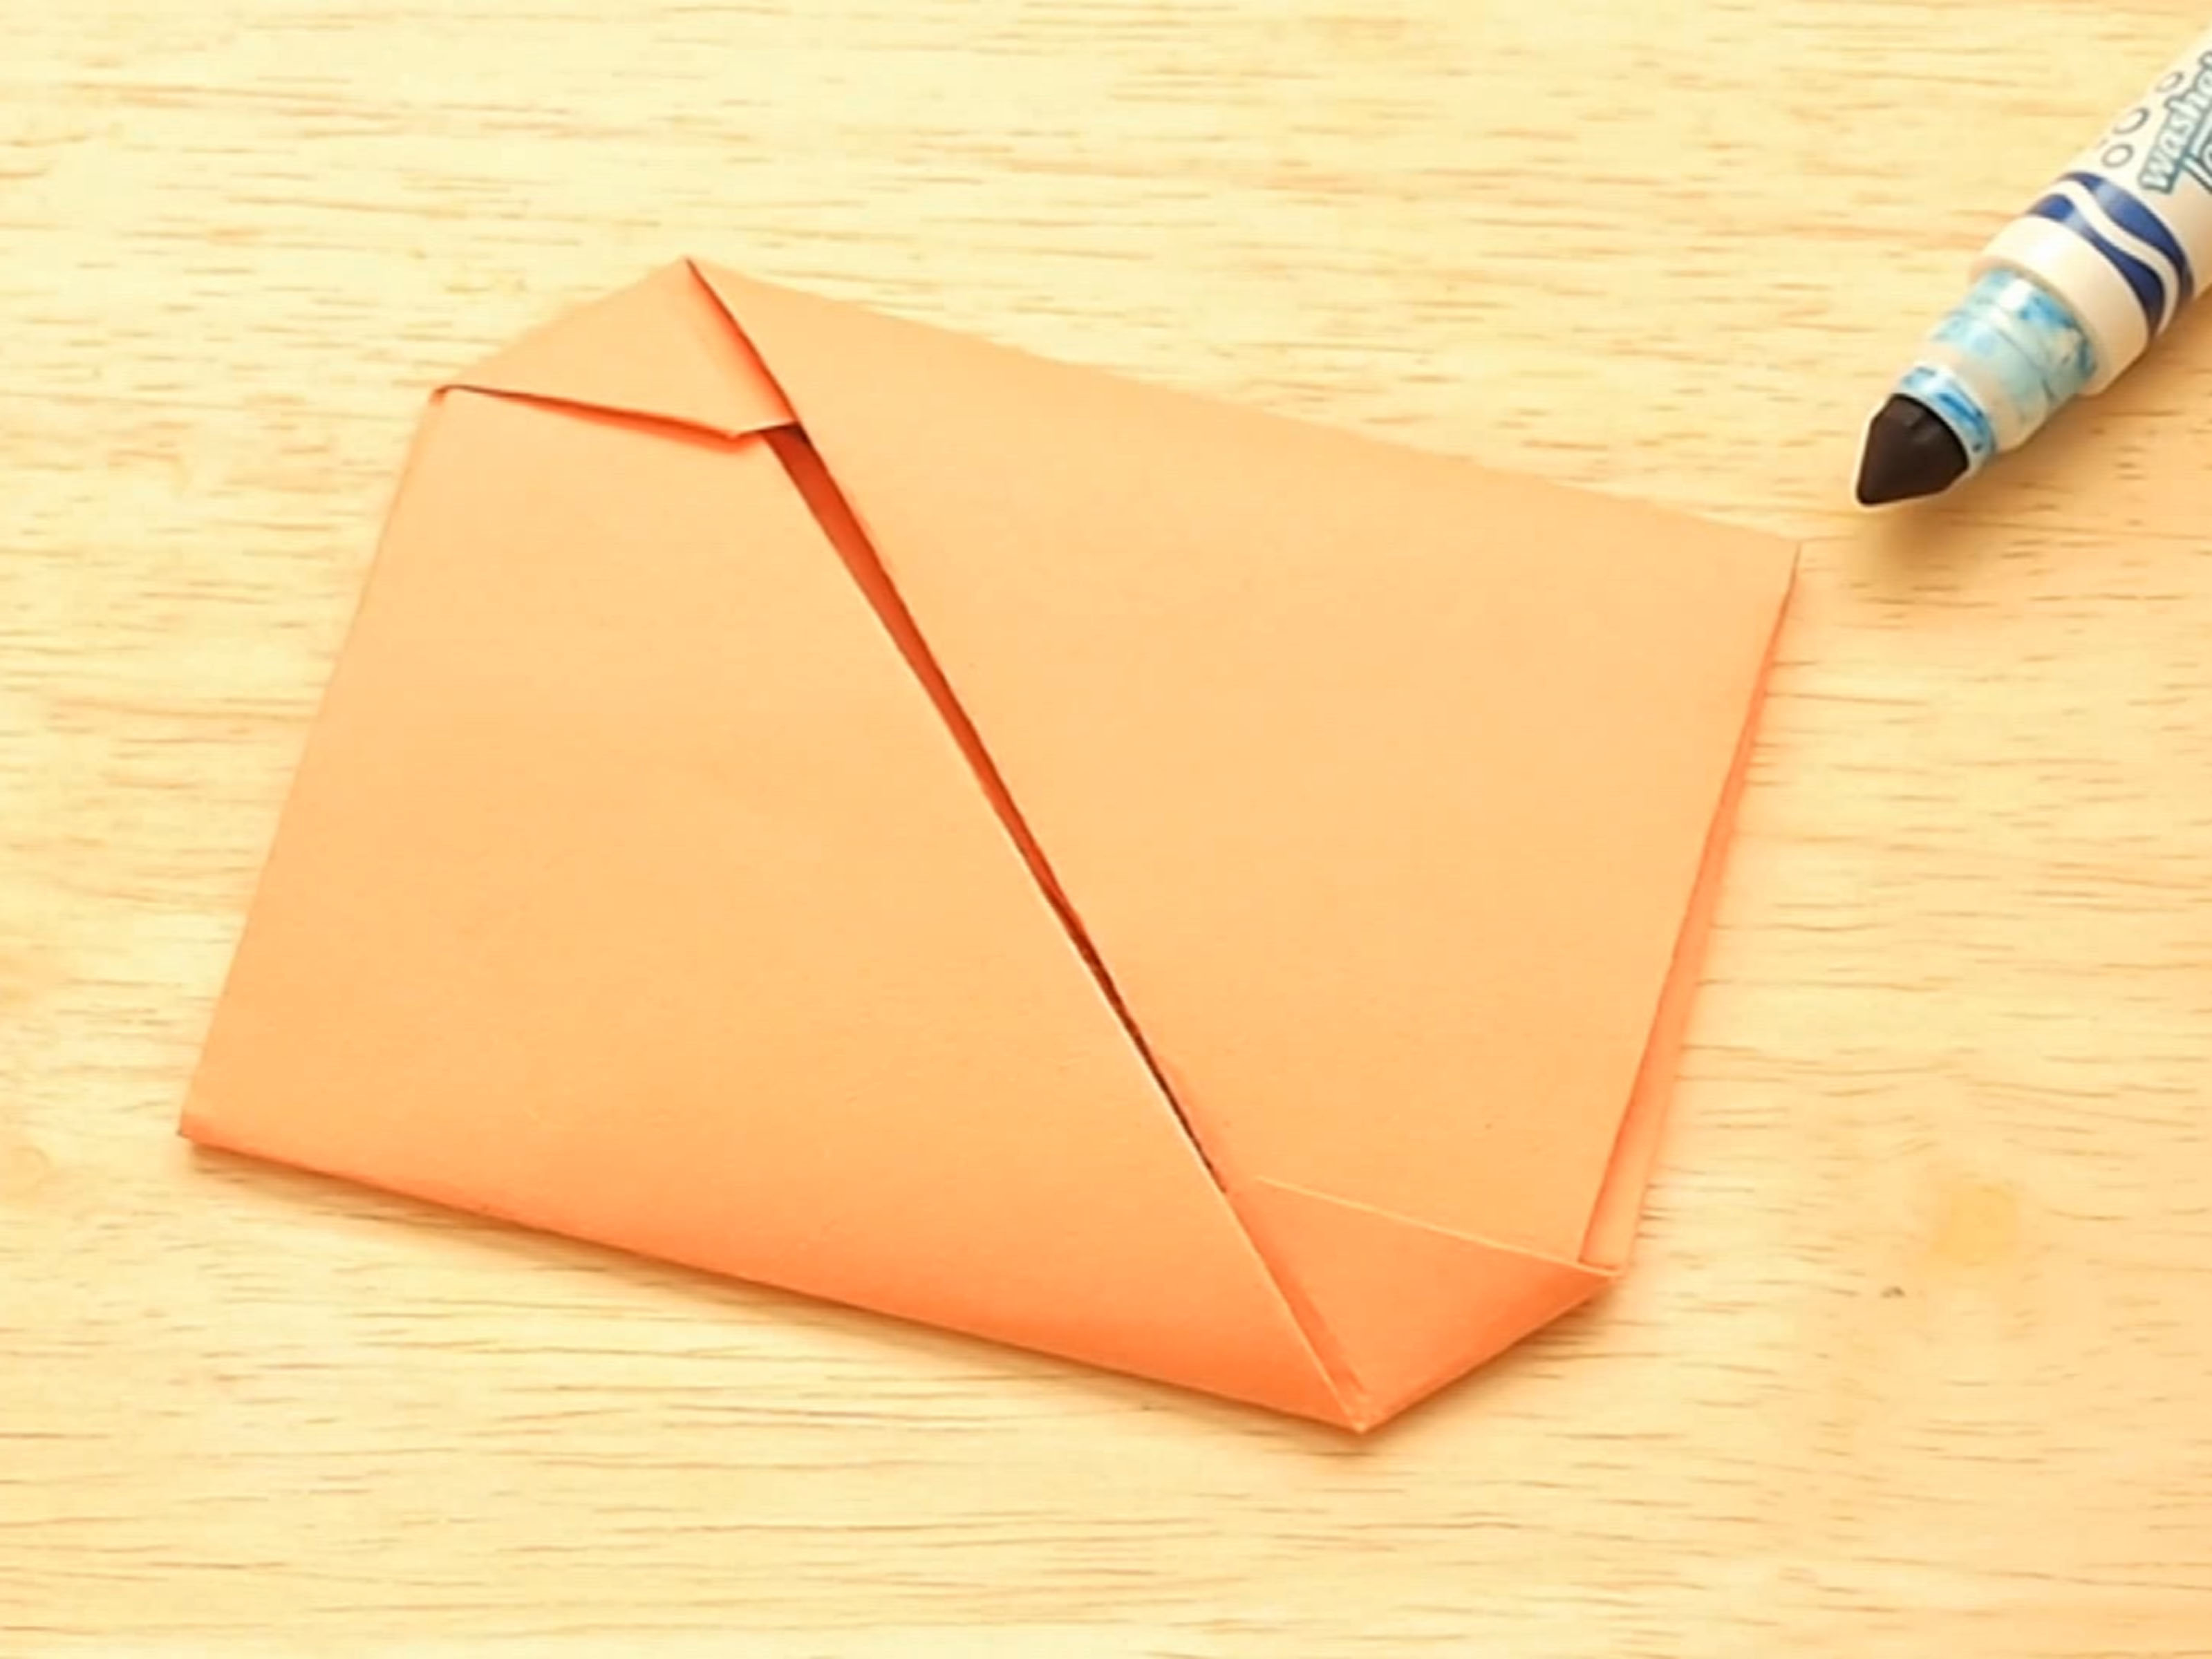 5 Note Origami How To Fold An Origami Envelope With Pictures Wikihow